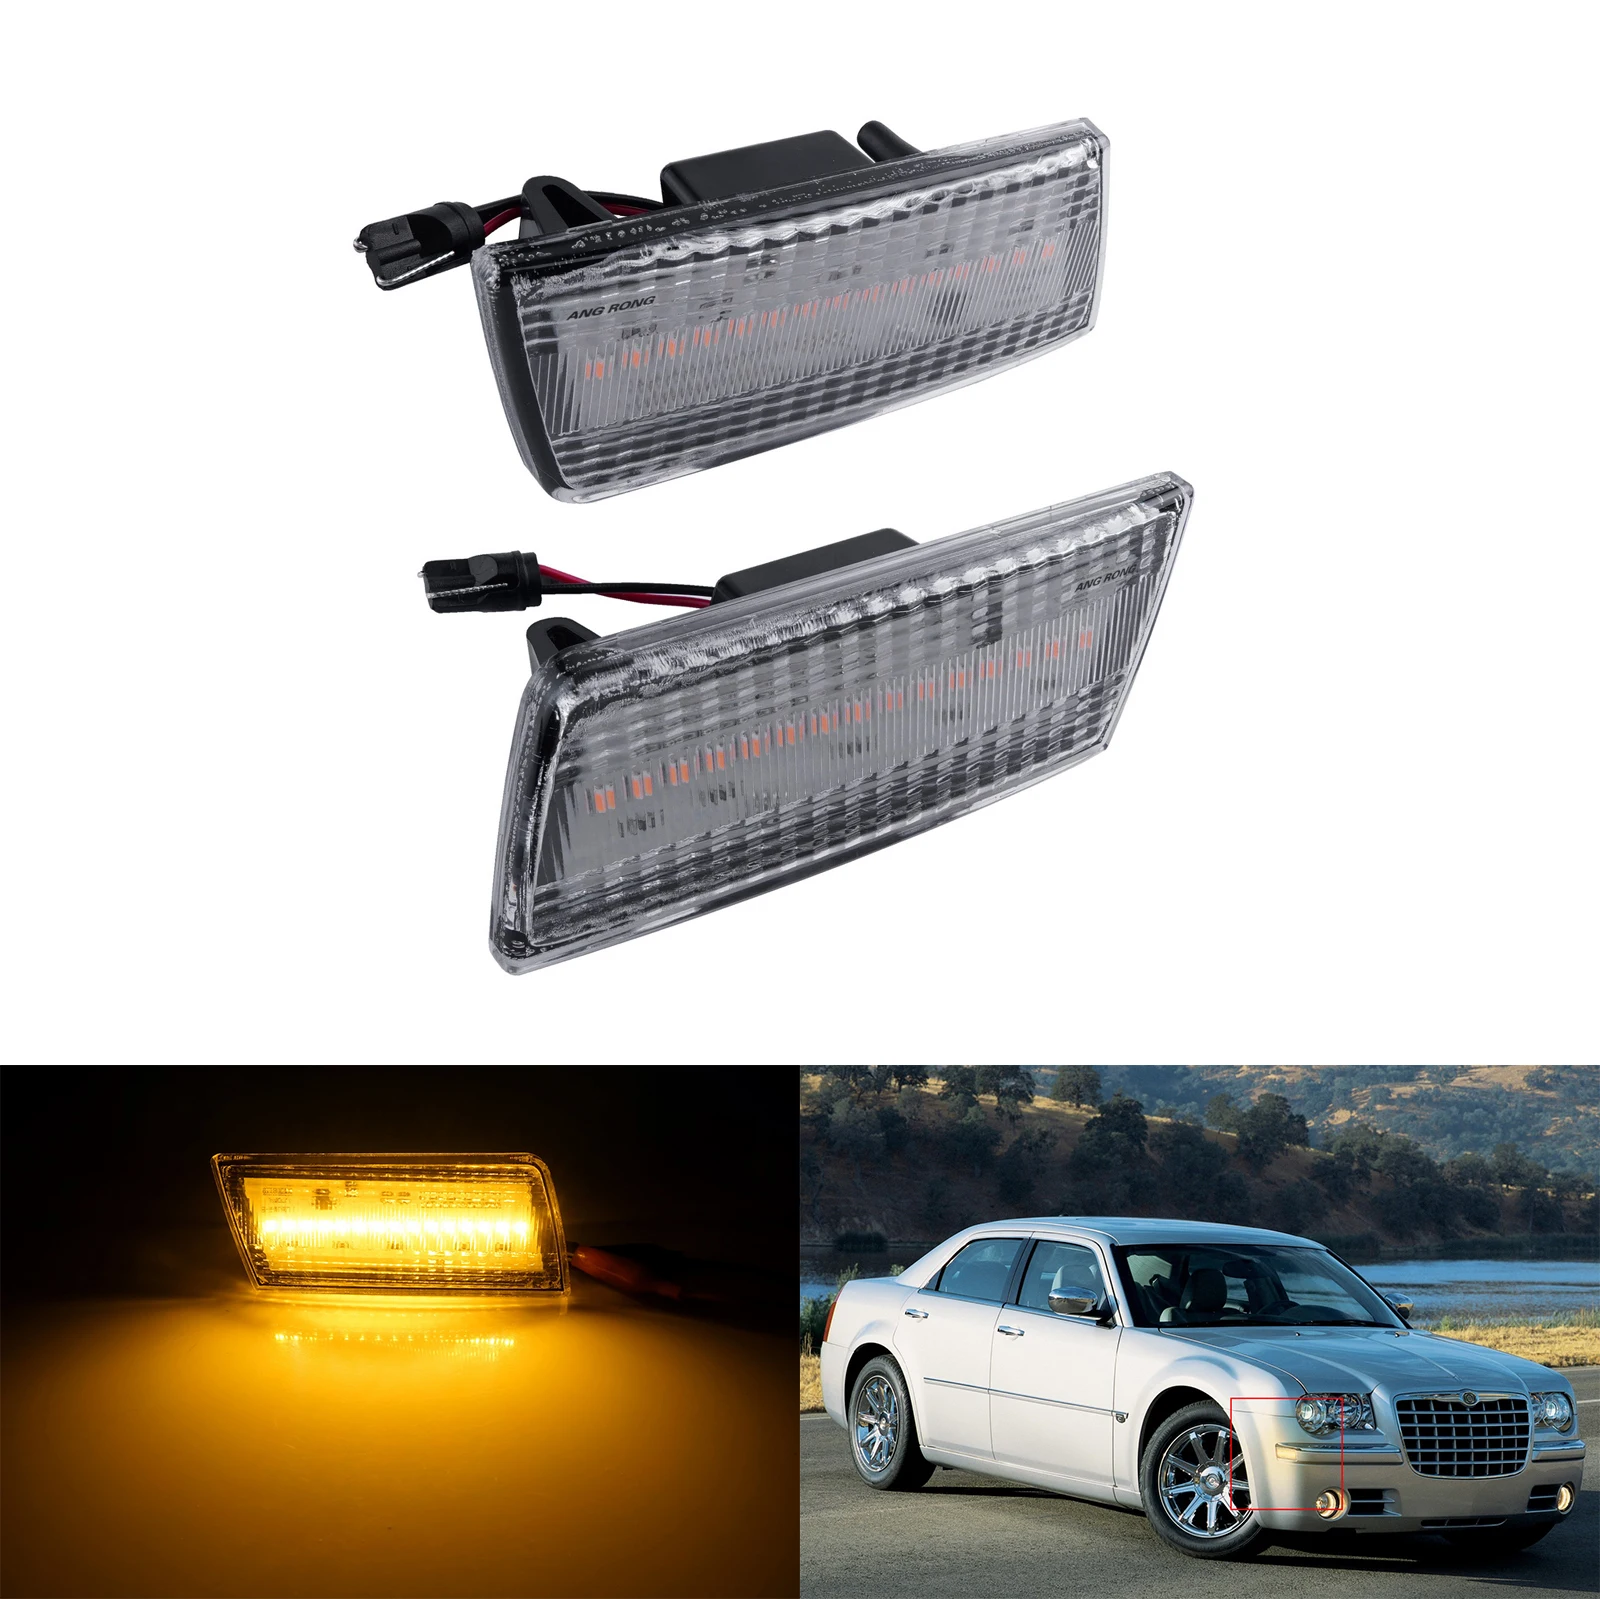 

ANGRONG 2x Amber Clear Lens LED Side Marker Repeater Indicator Light For Chrysler 300 2005-2010 Auto Lamp